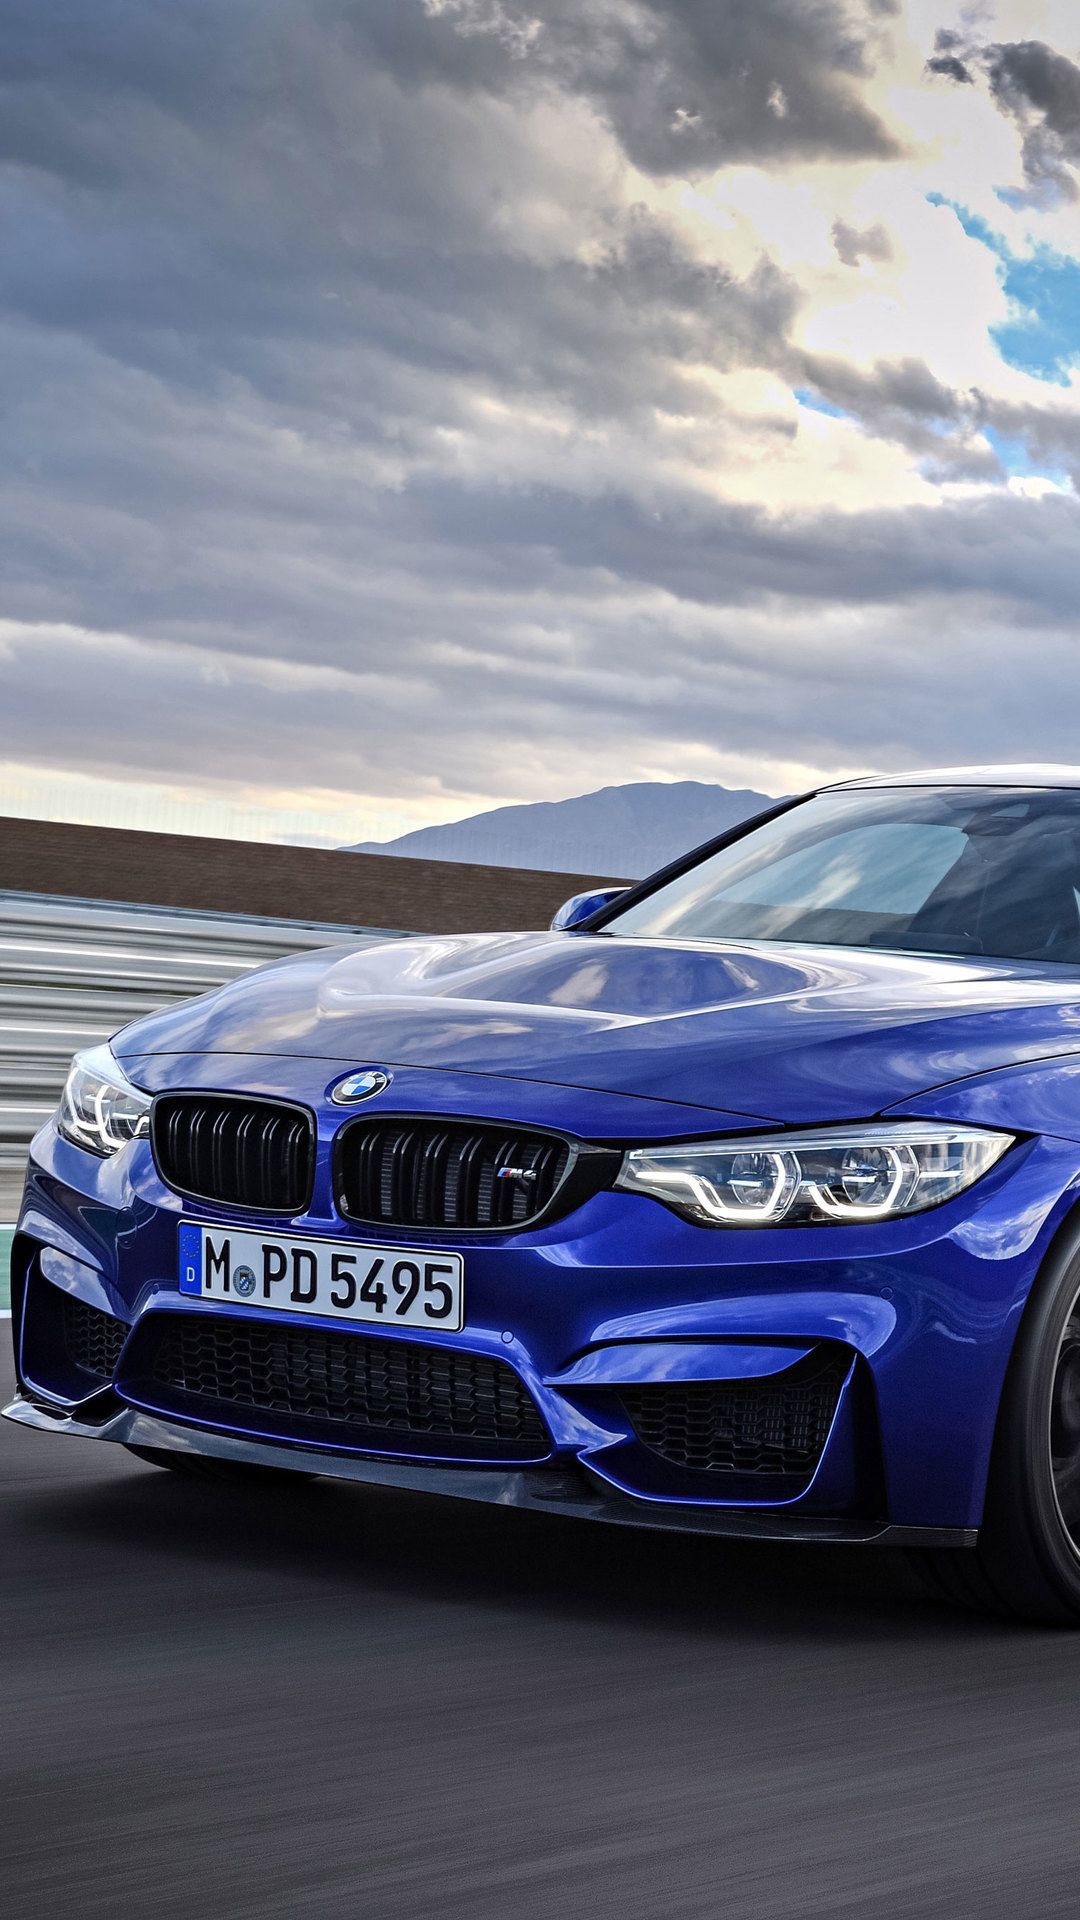 Bmw M4 Wallpaper Full HD Hupages Download iPhone Wallpaper. Bmw wallpaper, Bmw m Bmw